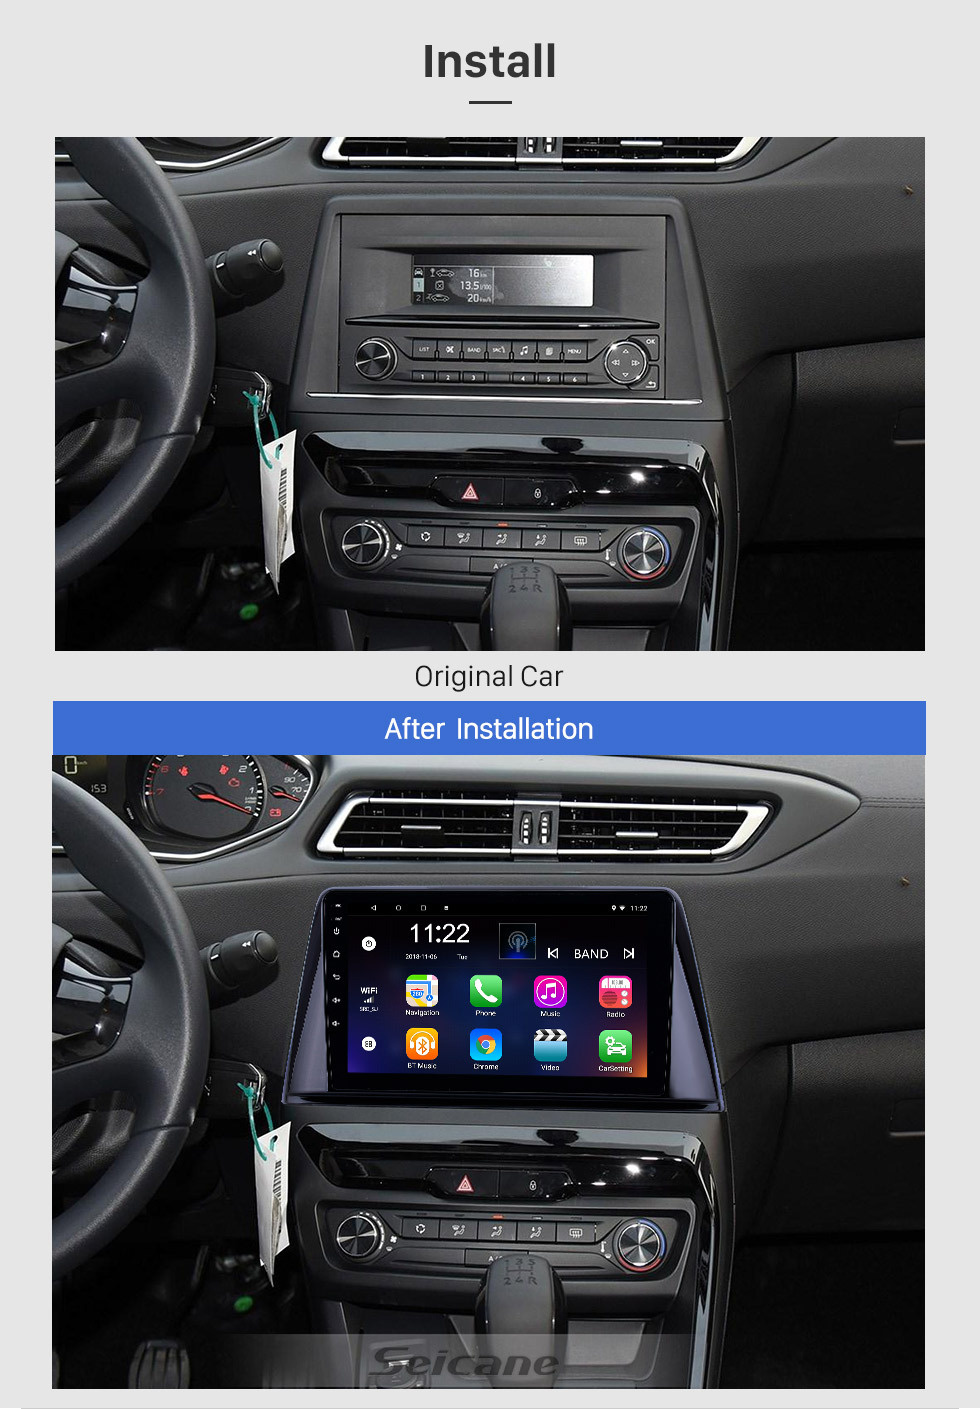 Seicane HD Touchscreen 9 inch Android 10.0 GPS Navigation Radio for 2016-2018 Peugeot 308 with Bluetooth support Carplay Rearview Camera